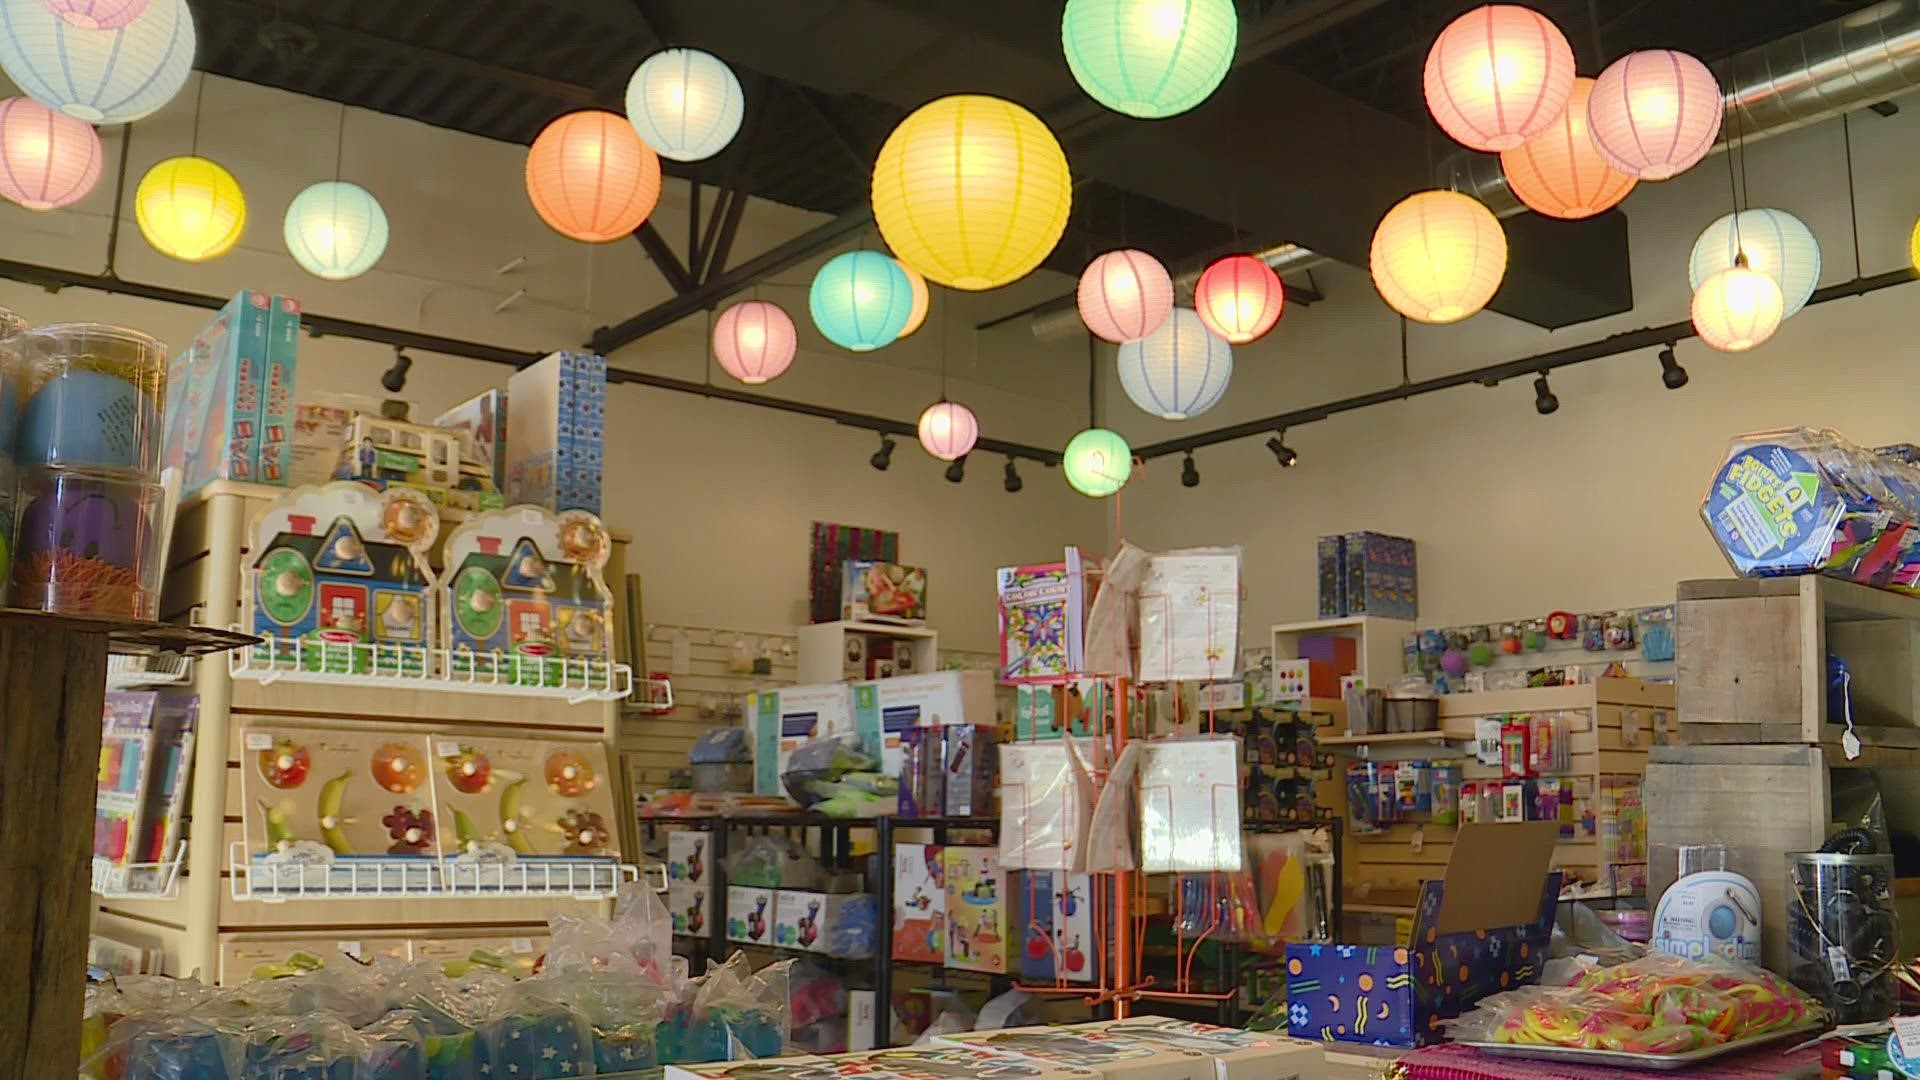 The Autism Community Store in Aurora is one of the first stores in the country to specialize in products for individuals on the autism spectrum.